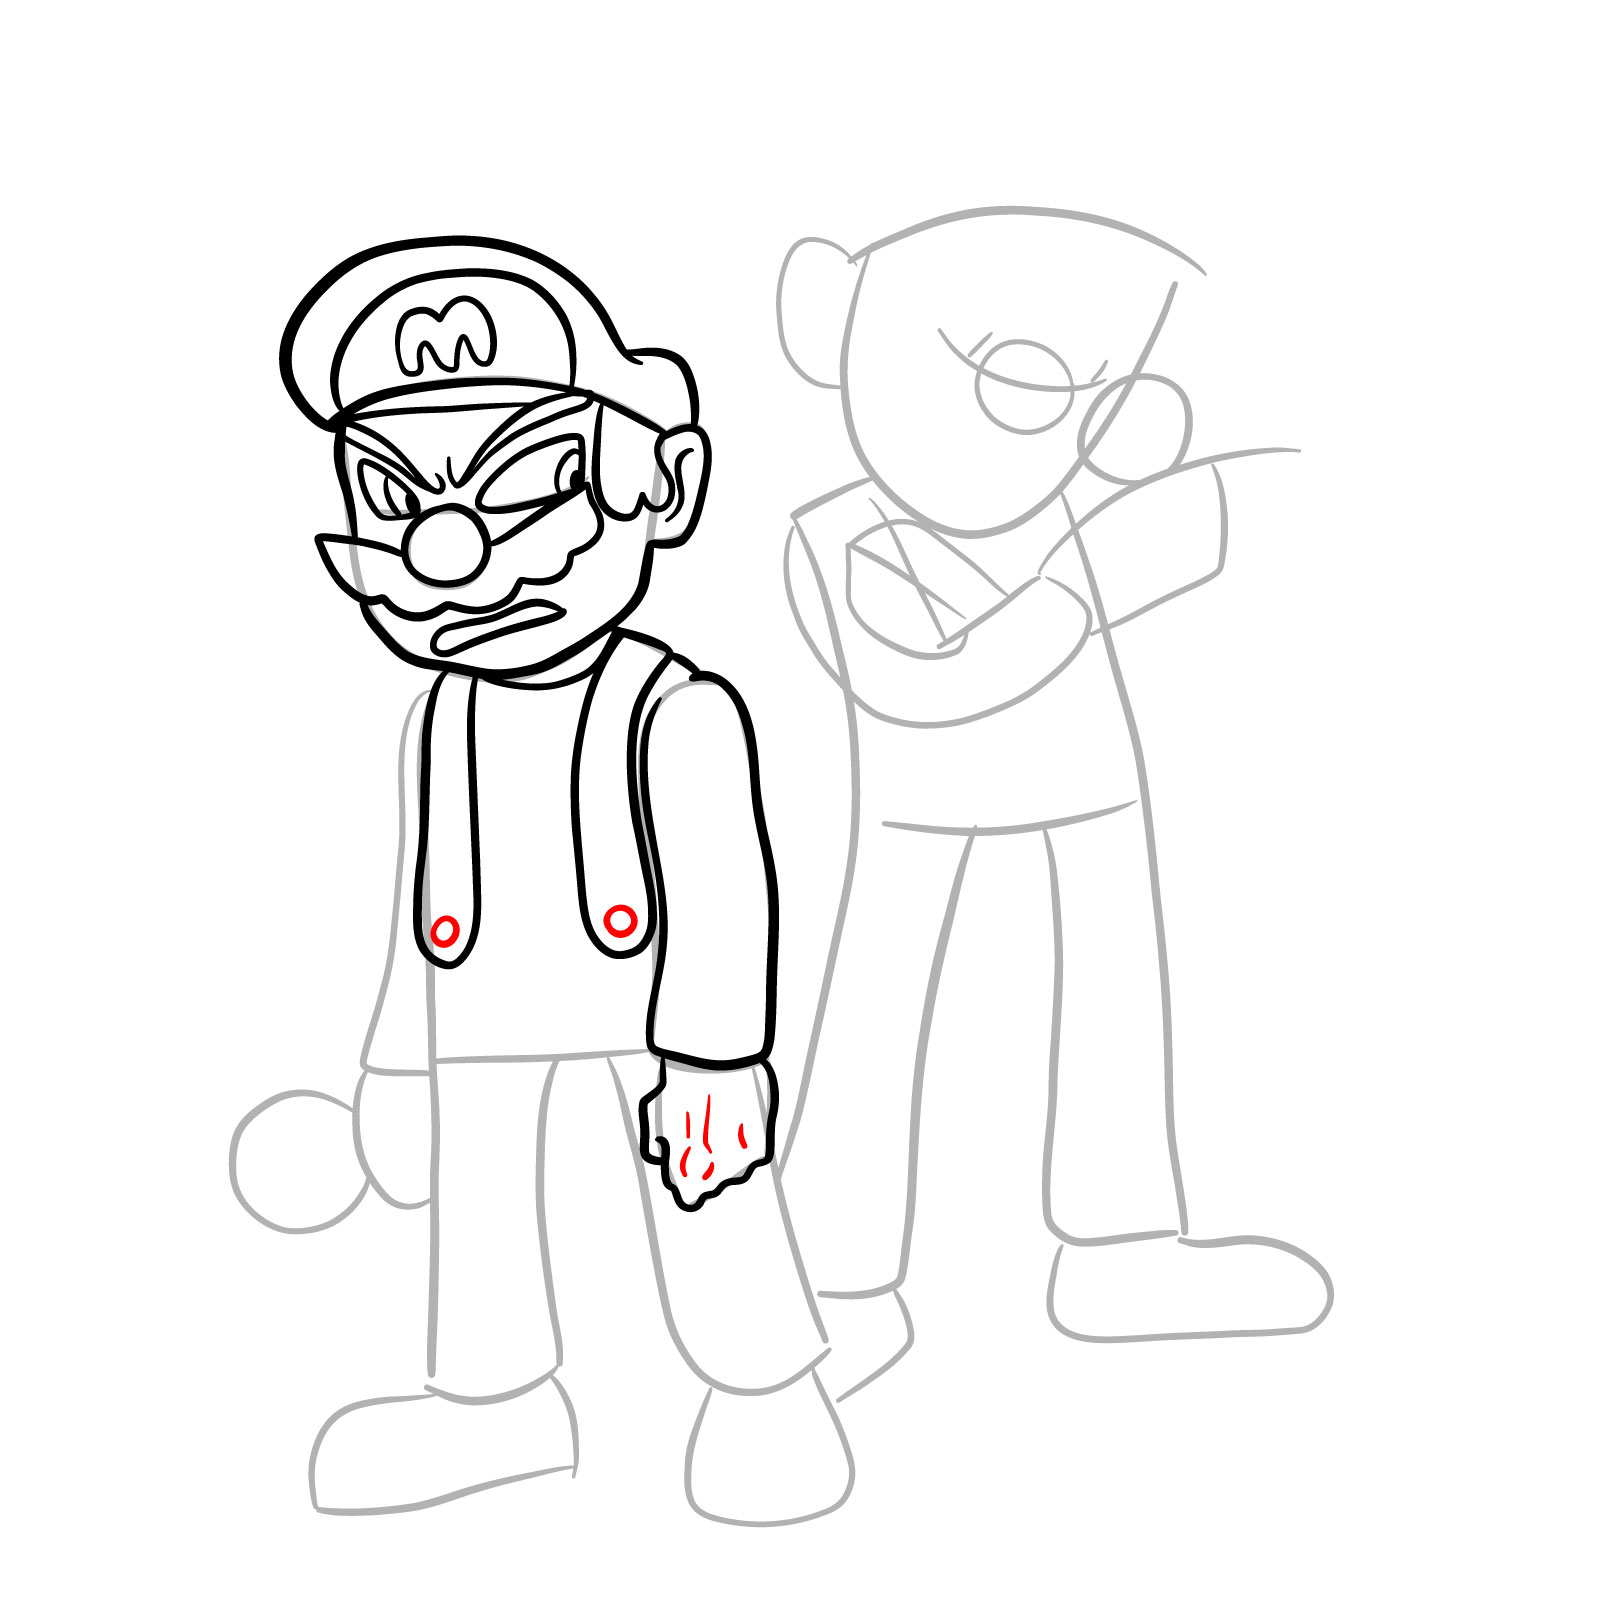 How to draw Mario and Luigi from Tails Gets Trolled - step 16